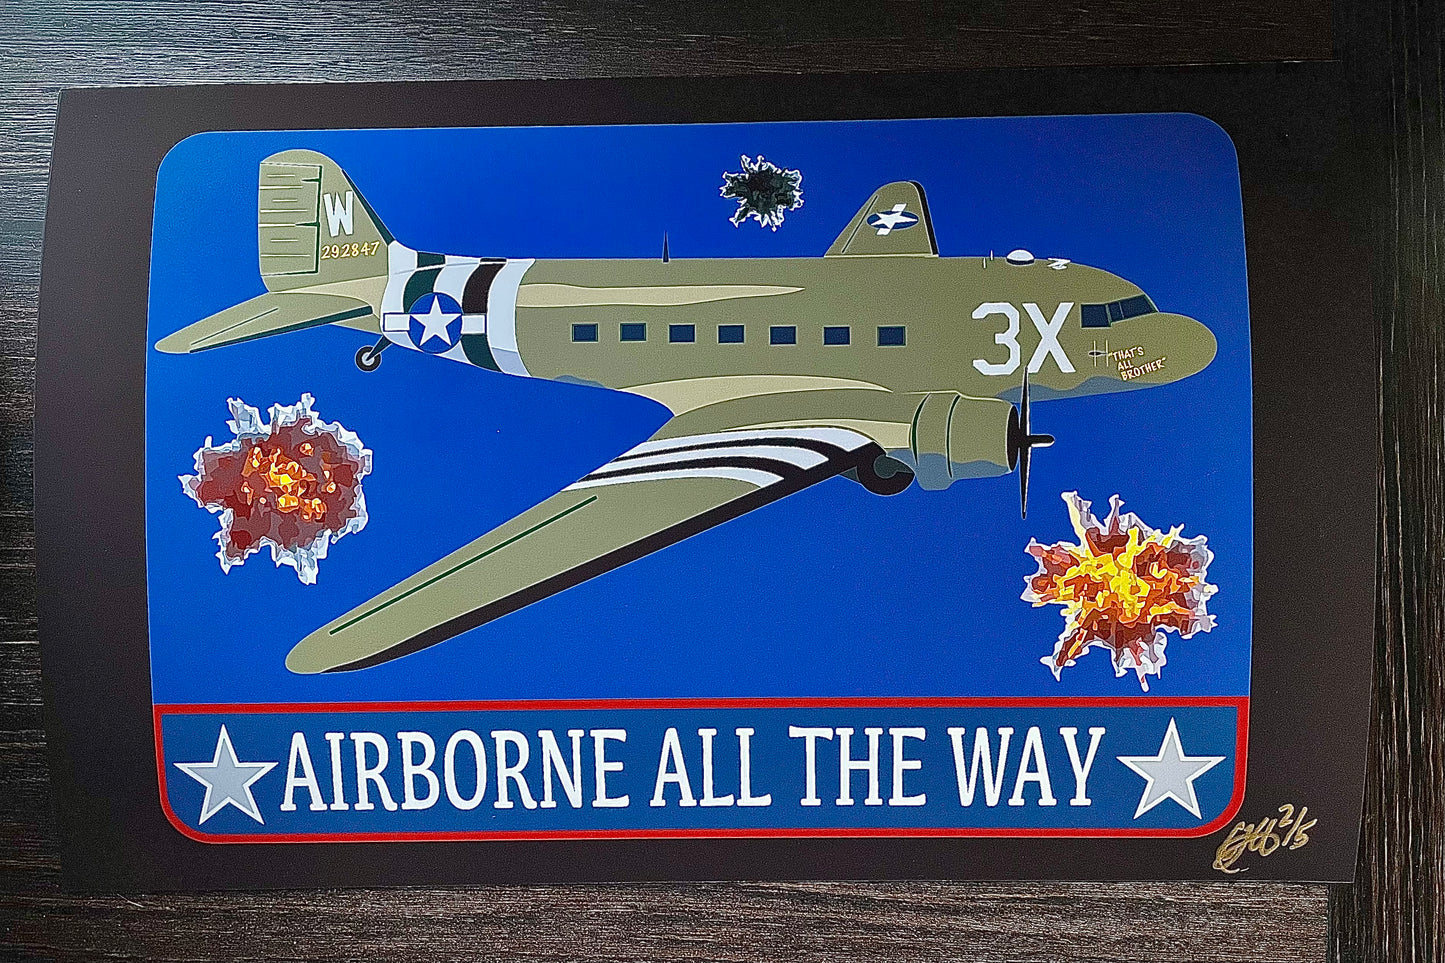 C47 “Airborne All The Way” Limited Edition Matte Print Poster 11x17